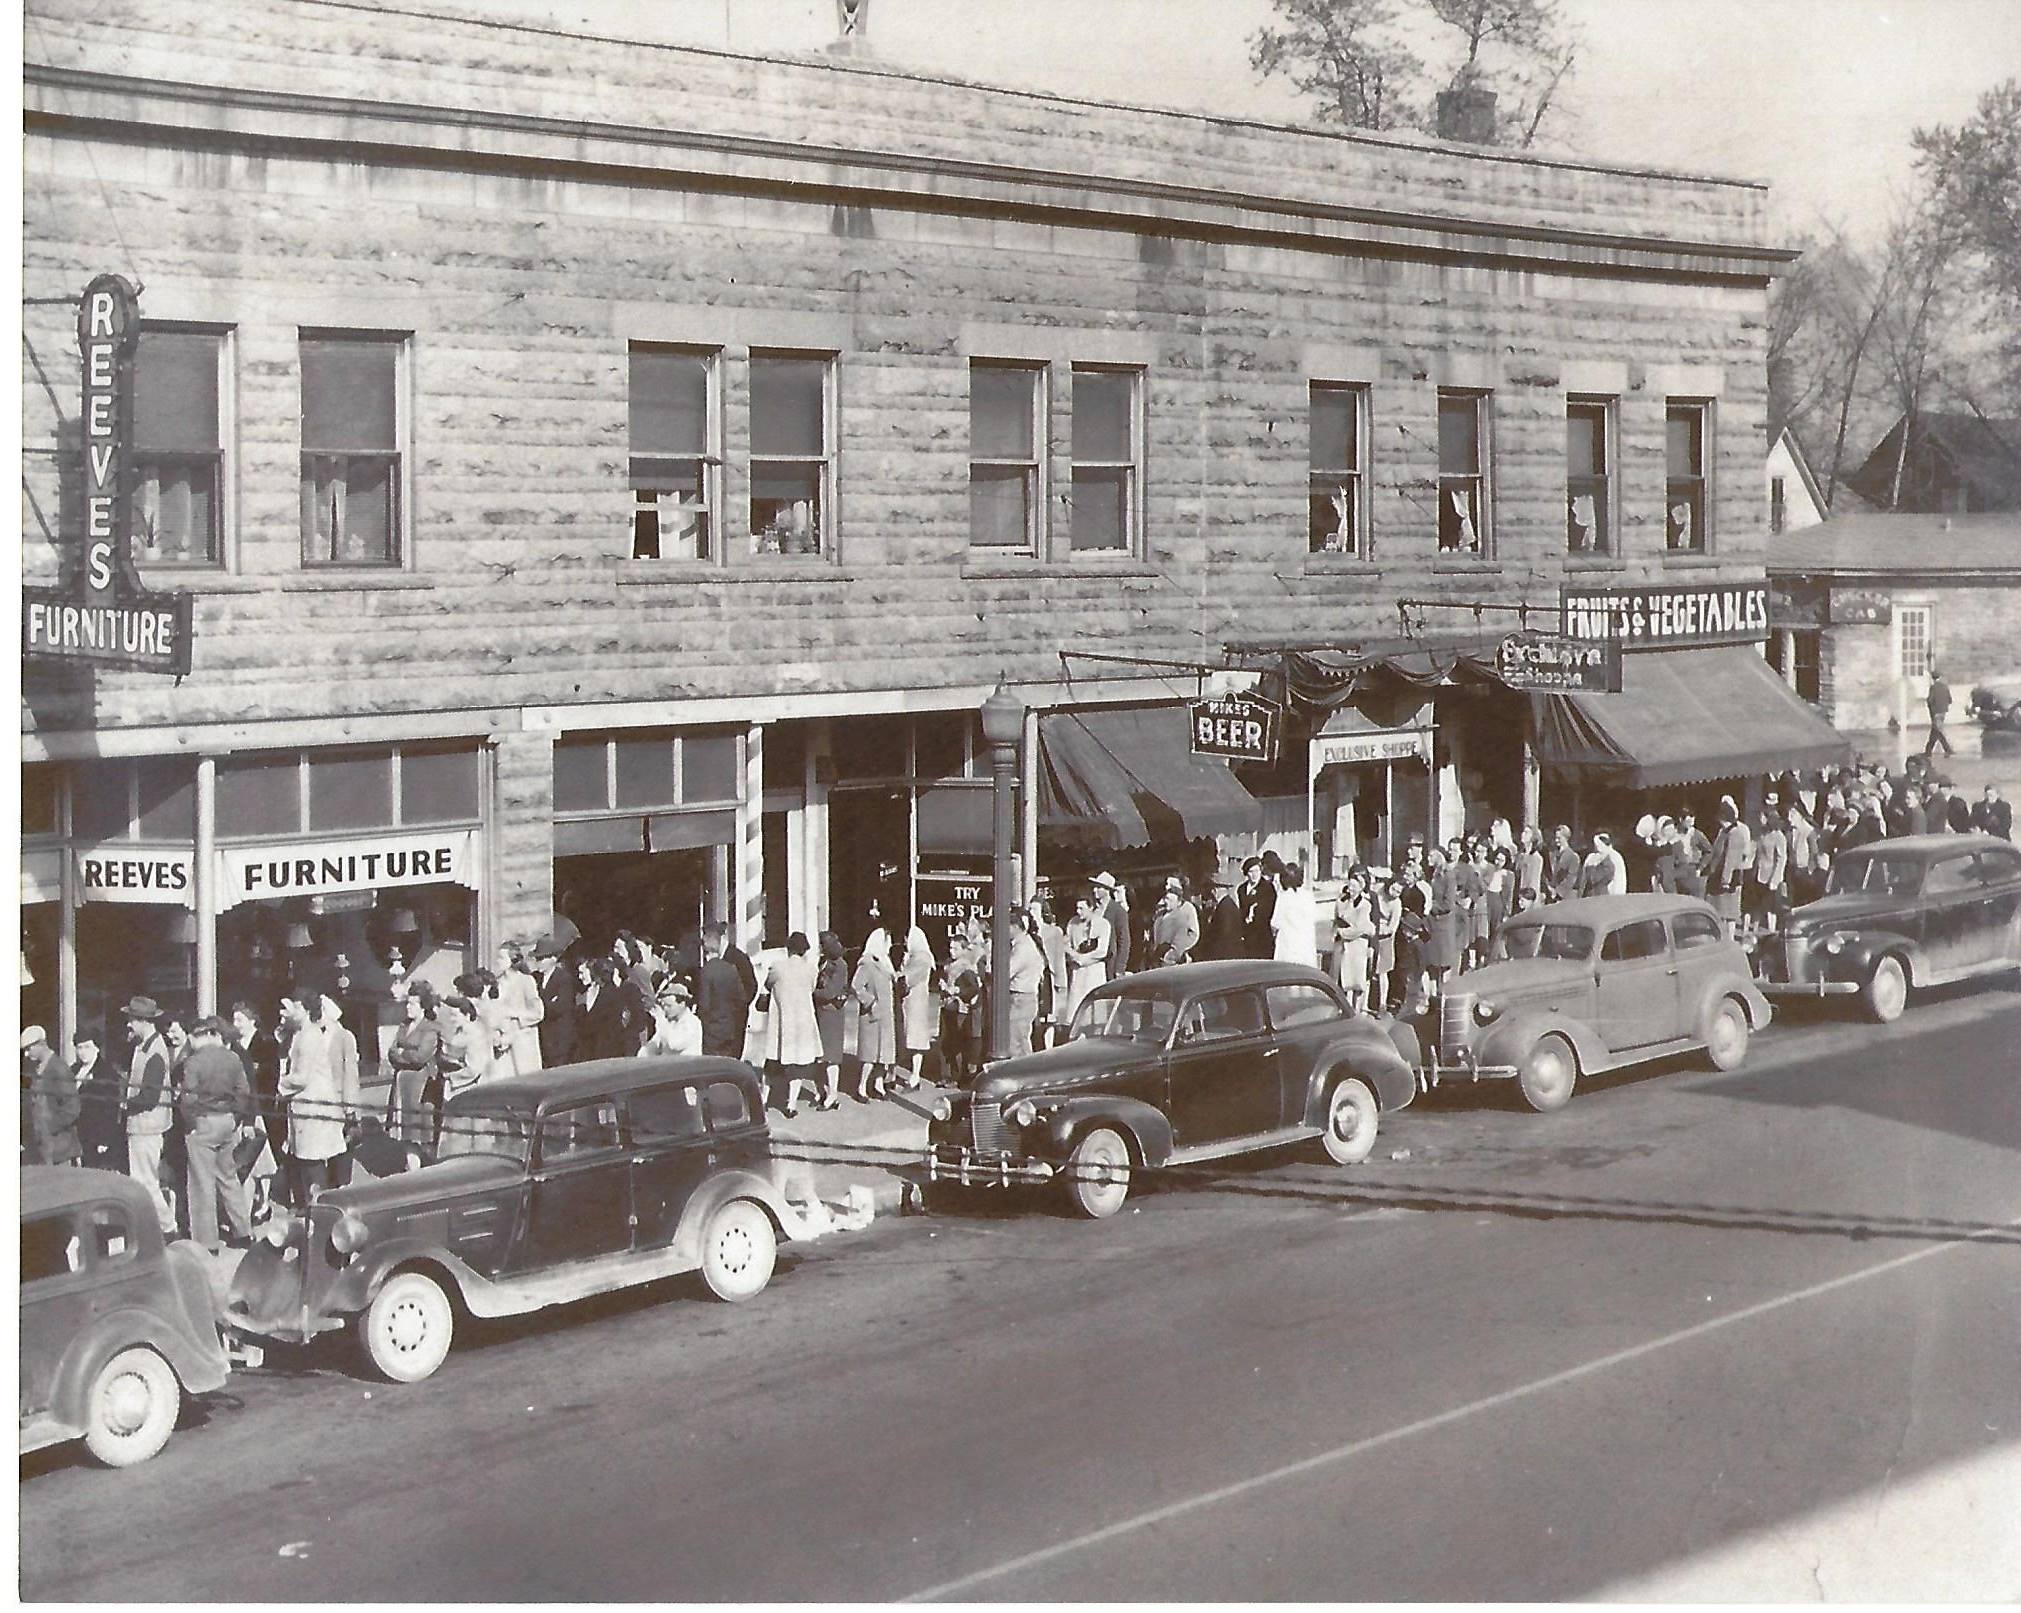 existing building photo of 221 North Walnut Street bloomington indinana in the 1940s